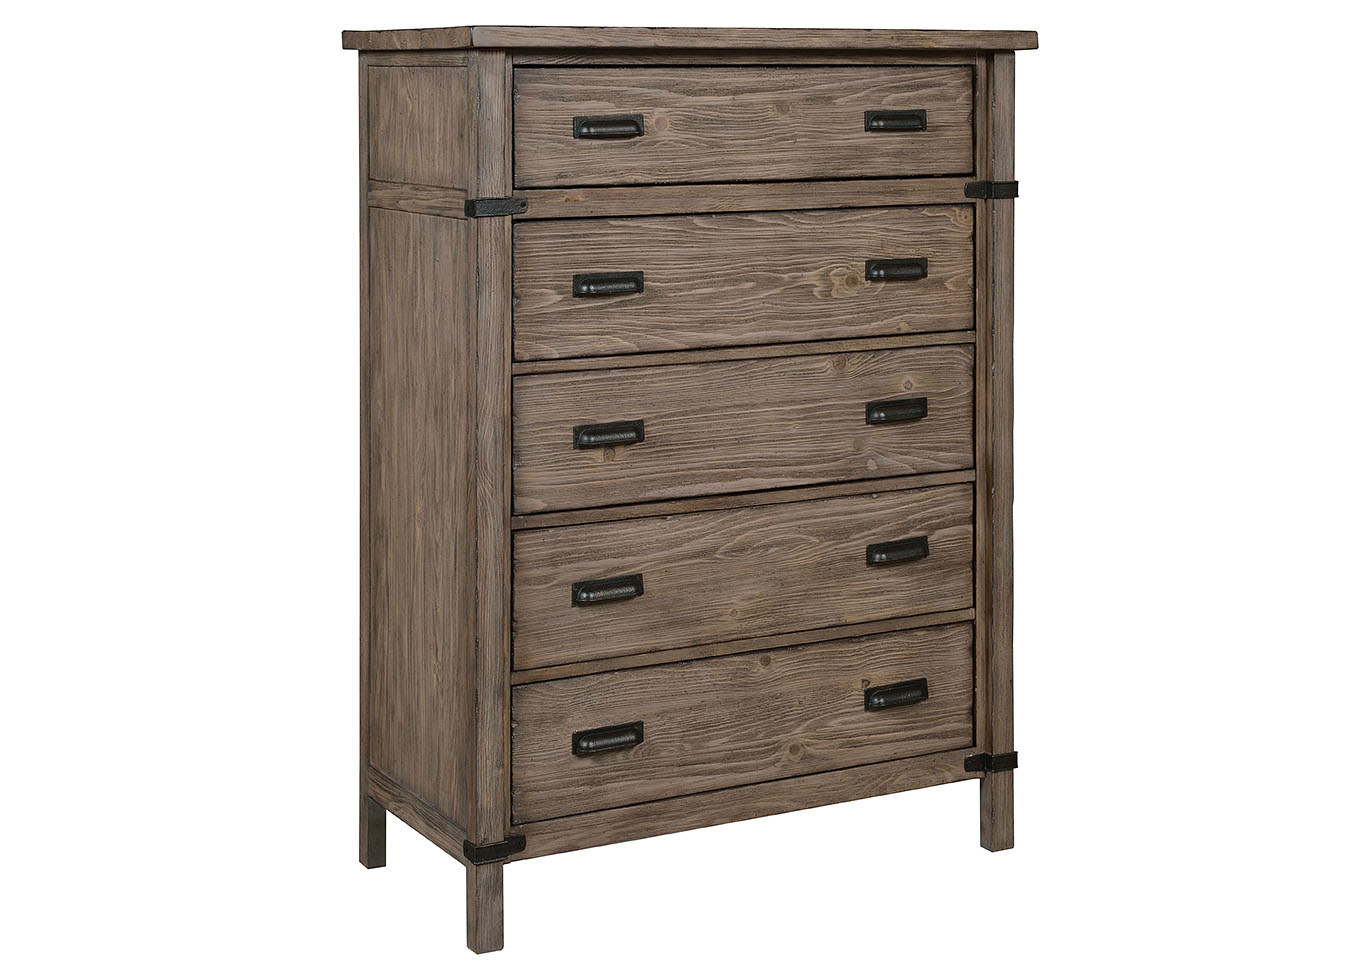 Foundry Driftwood Drawer Chest,Kincaid